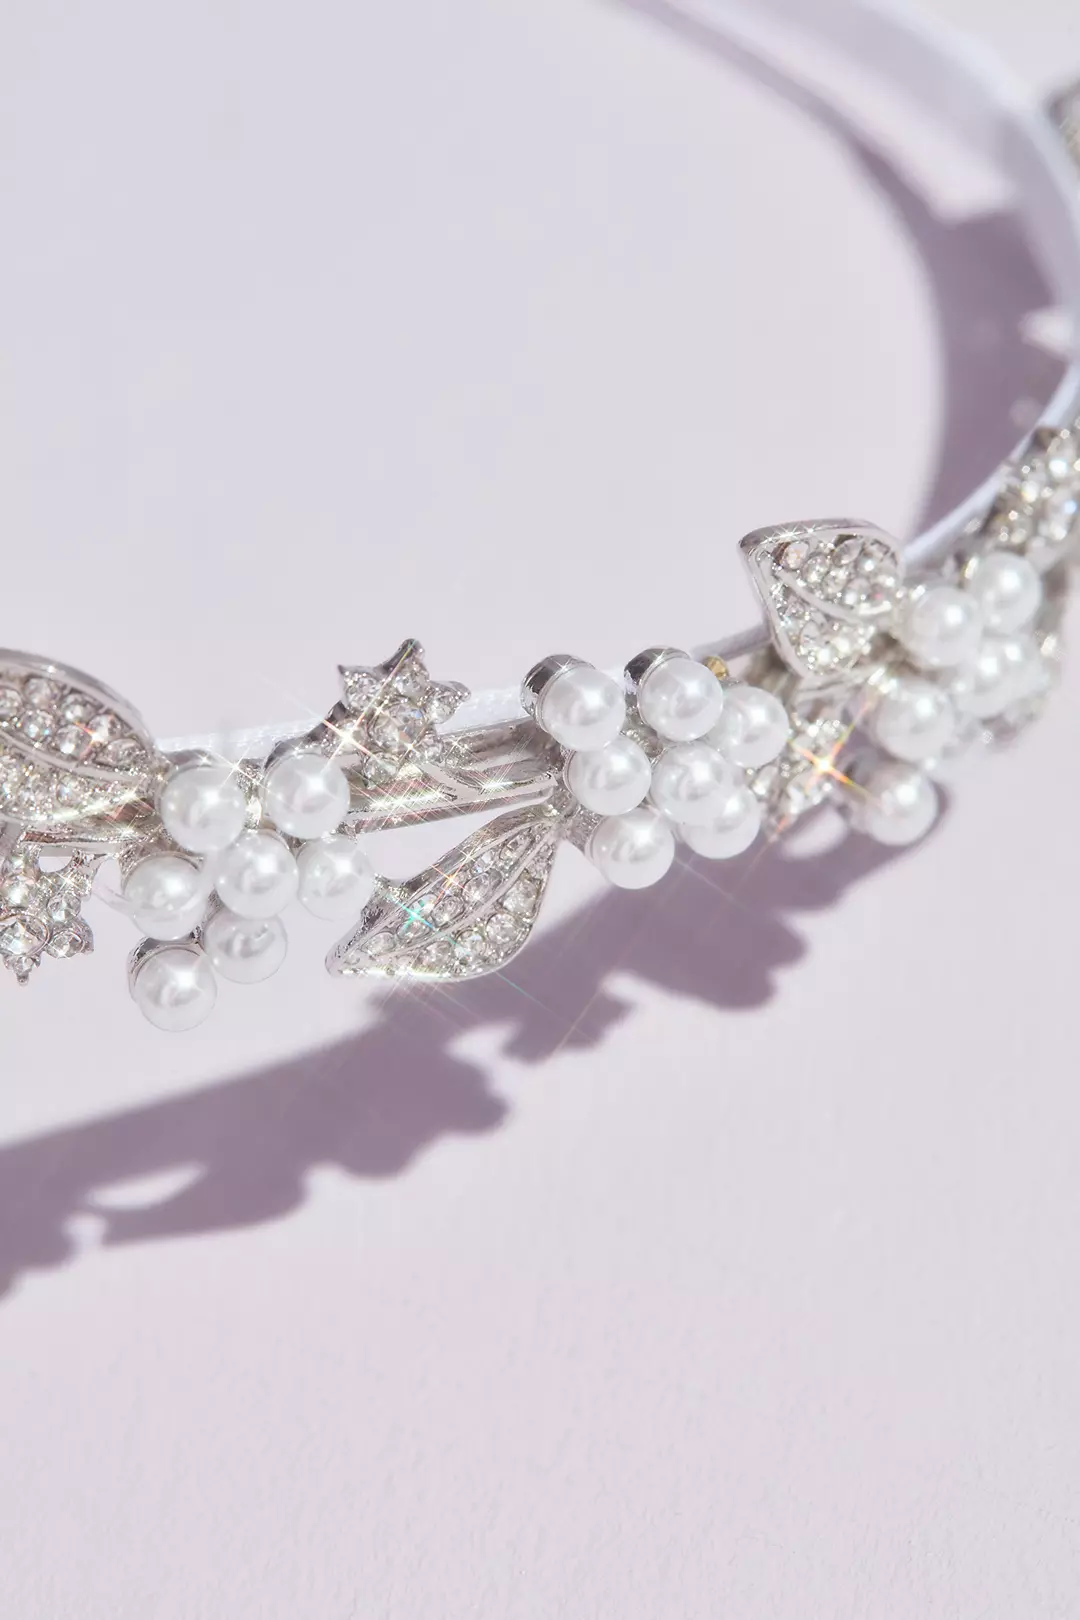 Petite Pearl Flower Headband with Crystals Image 2